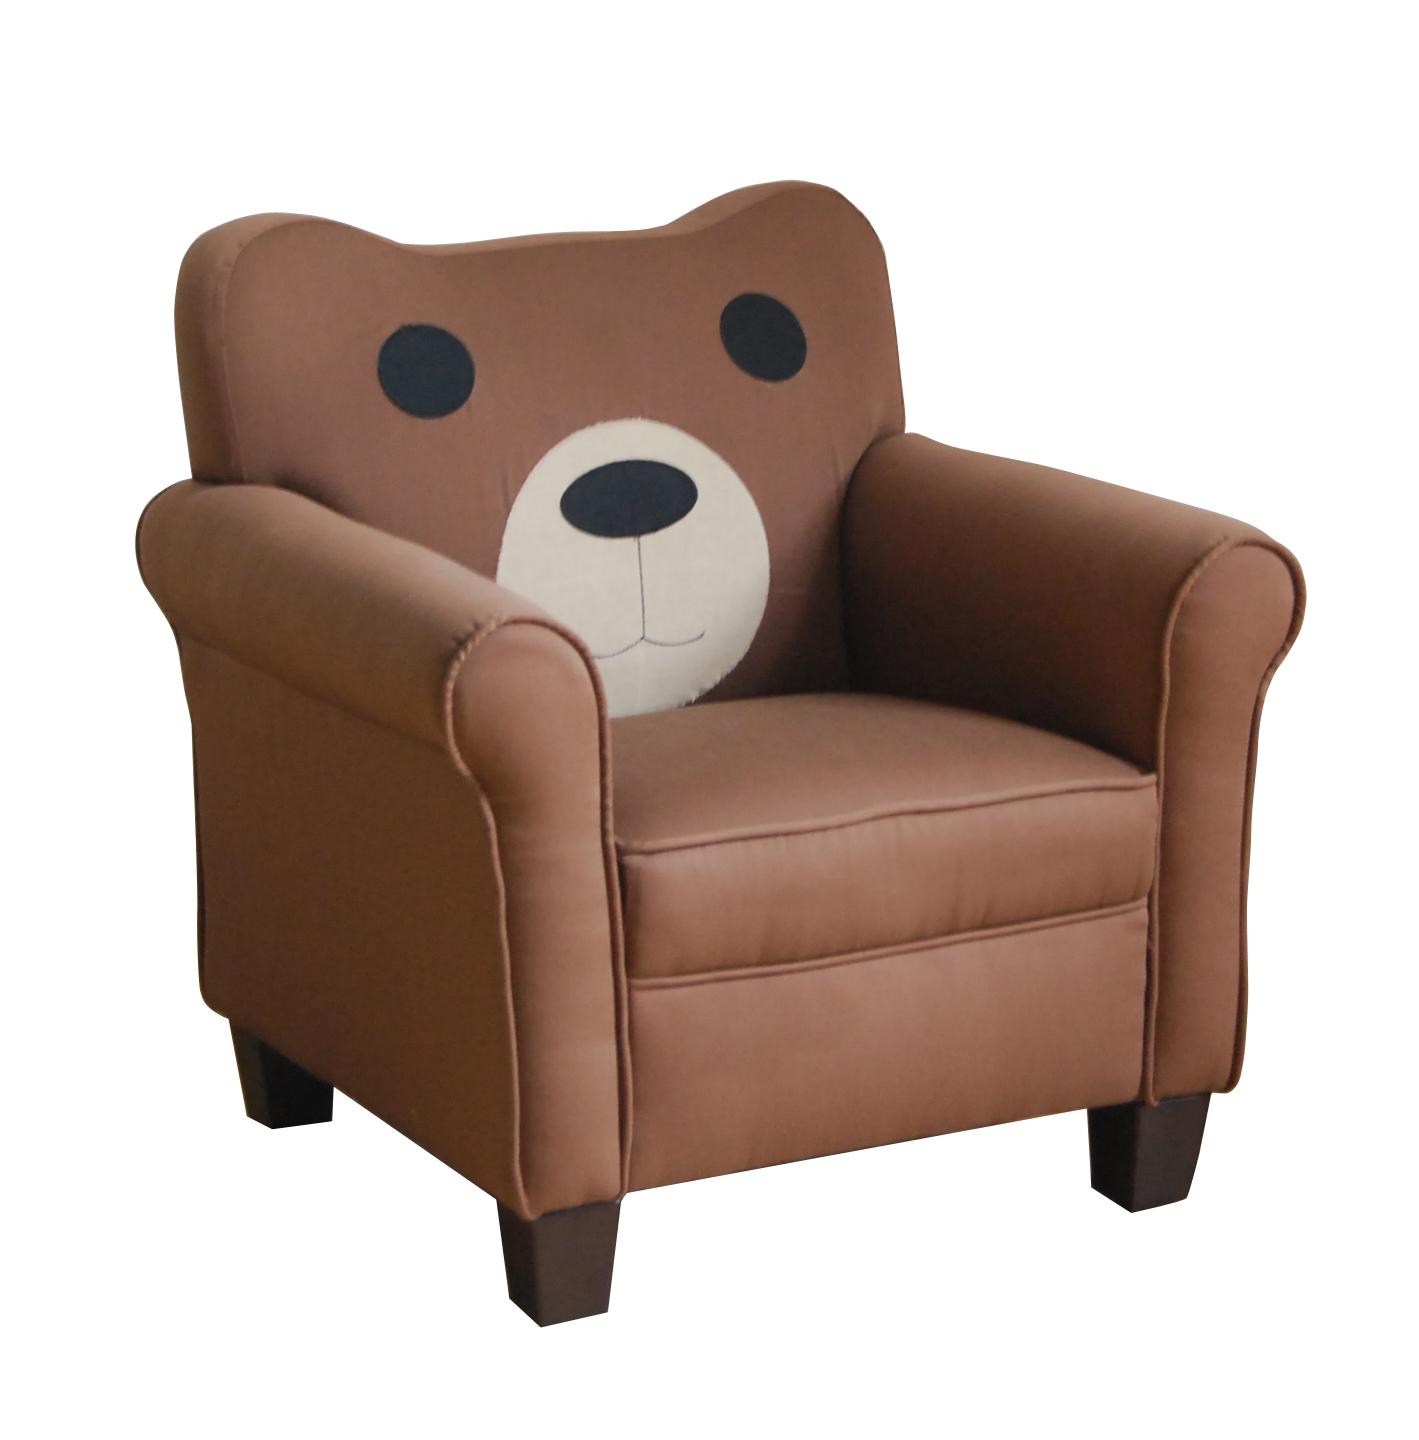 Shop Teddy Bear Accent Chair - Free Shipping Today - Overstock - 6205747